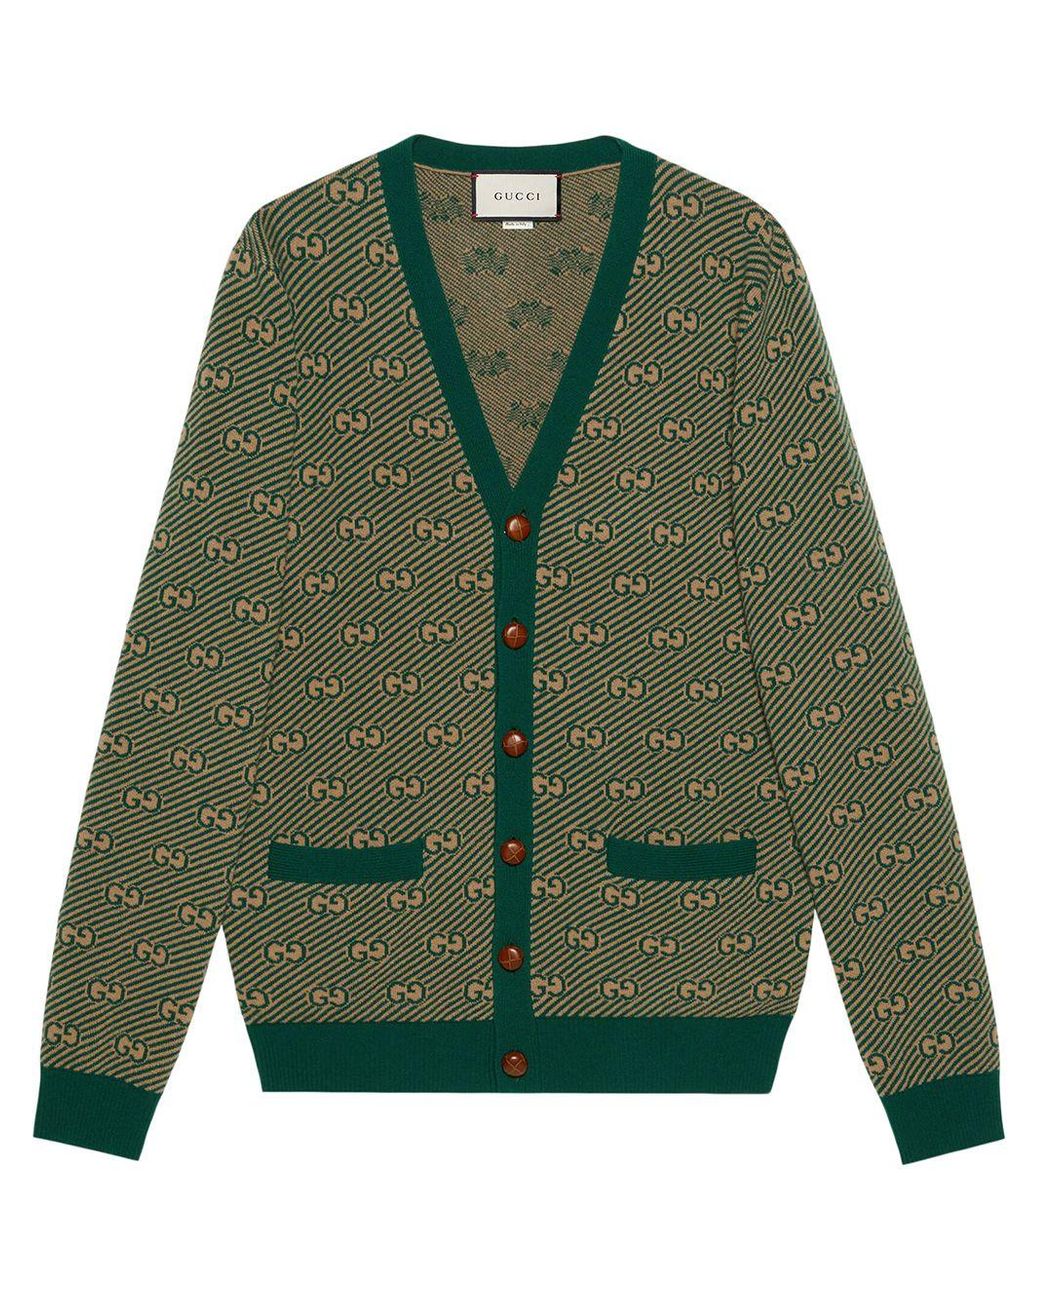 Gucci Wool GG Stripe Knitted Cardigan in Green for Men - Lyst